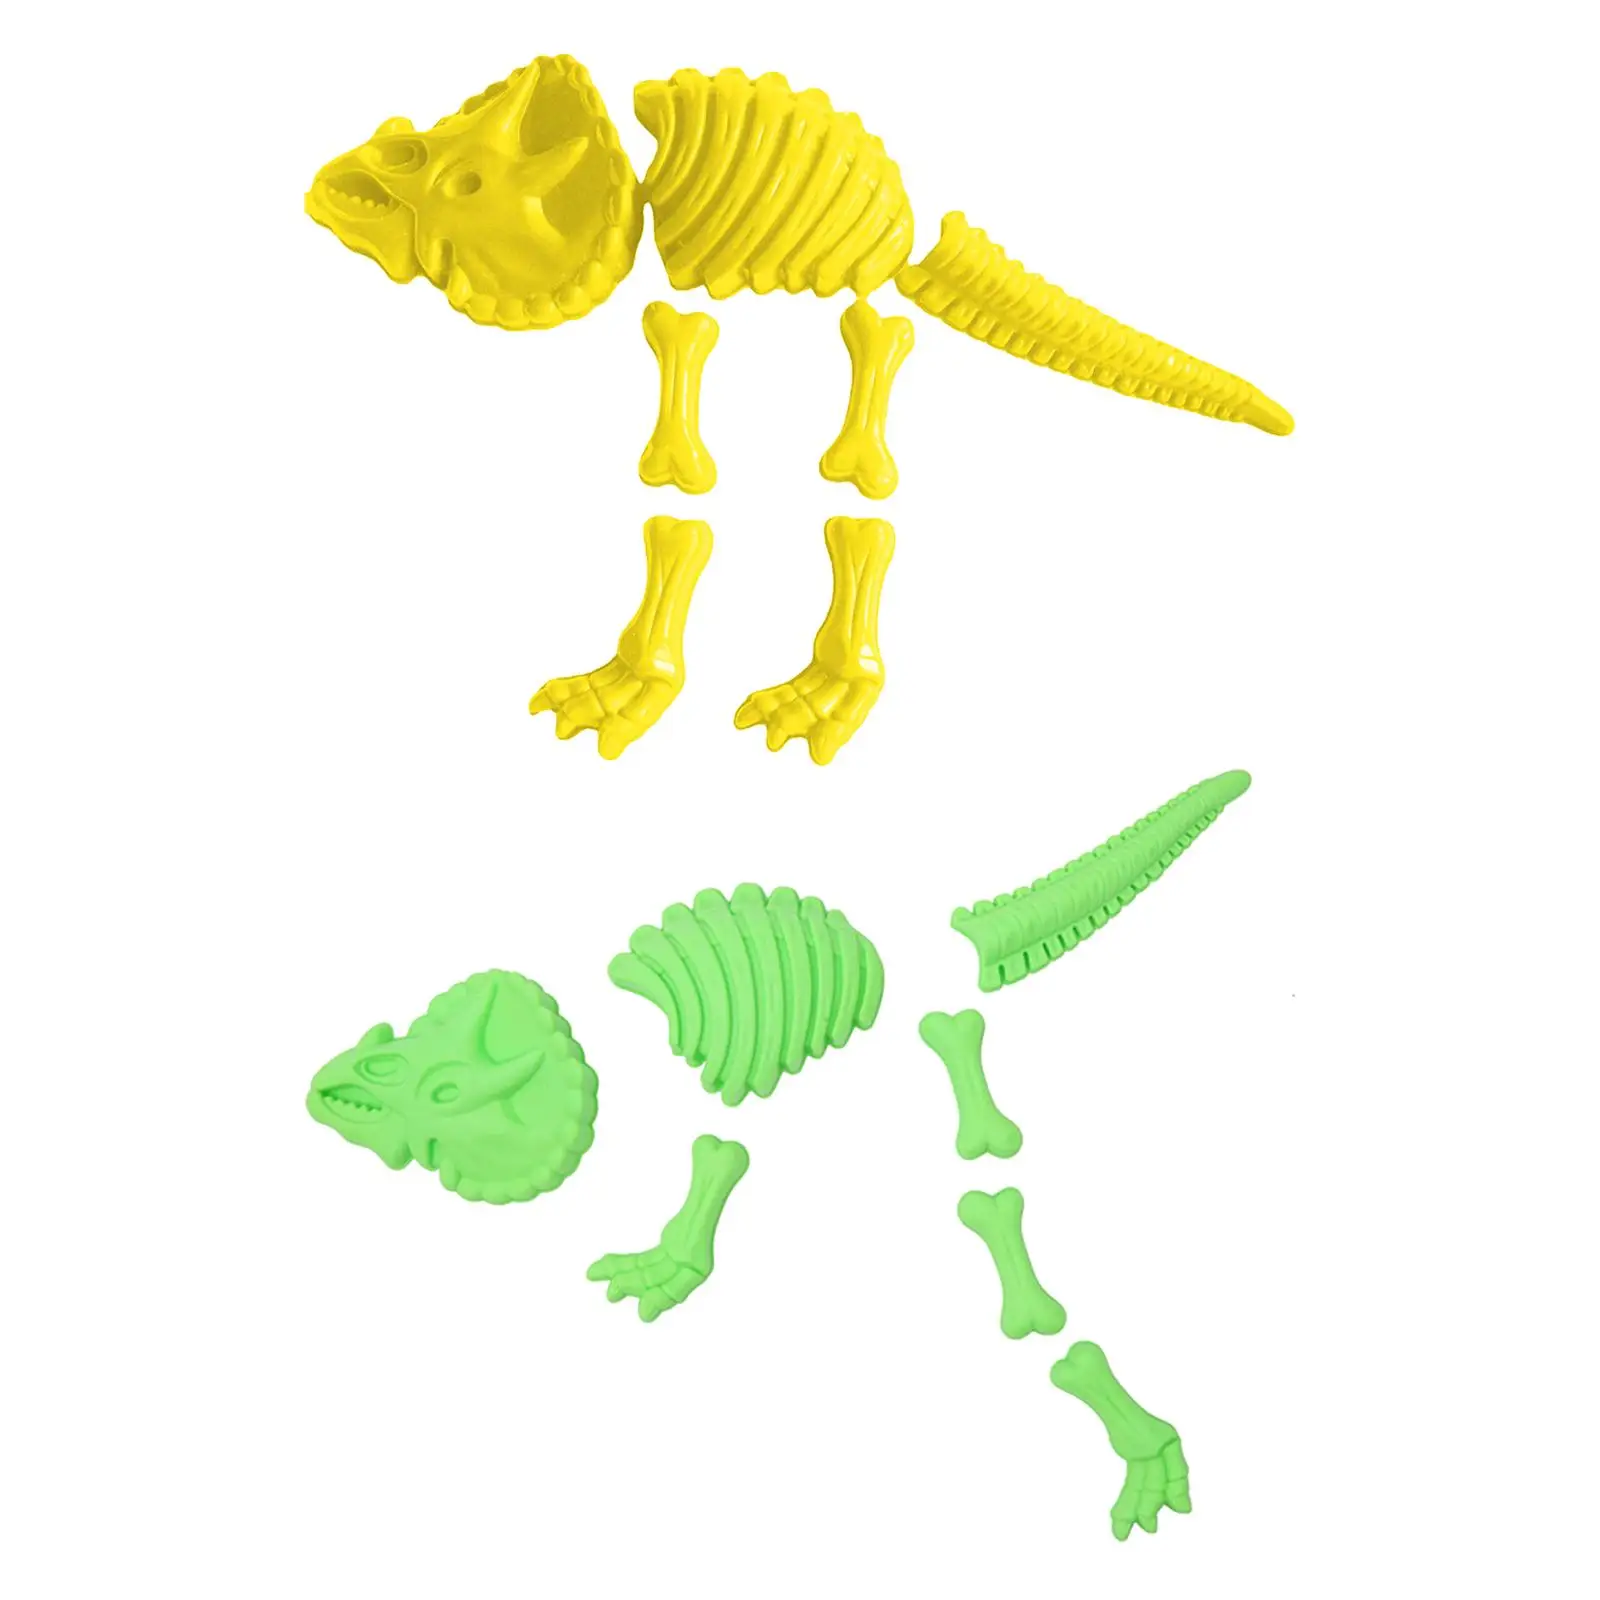 

7 Pieces Play Sand Skeleton Dinosaur Toys Party Favors Summer Outdoors Games for Boys and Girls Age 2 3 4 5 6 8 Children Kids